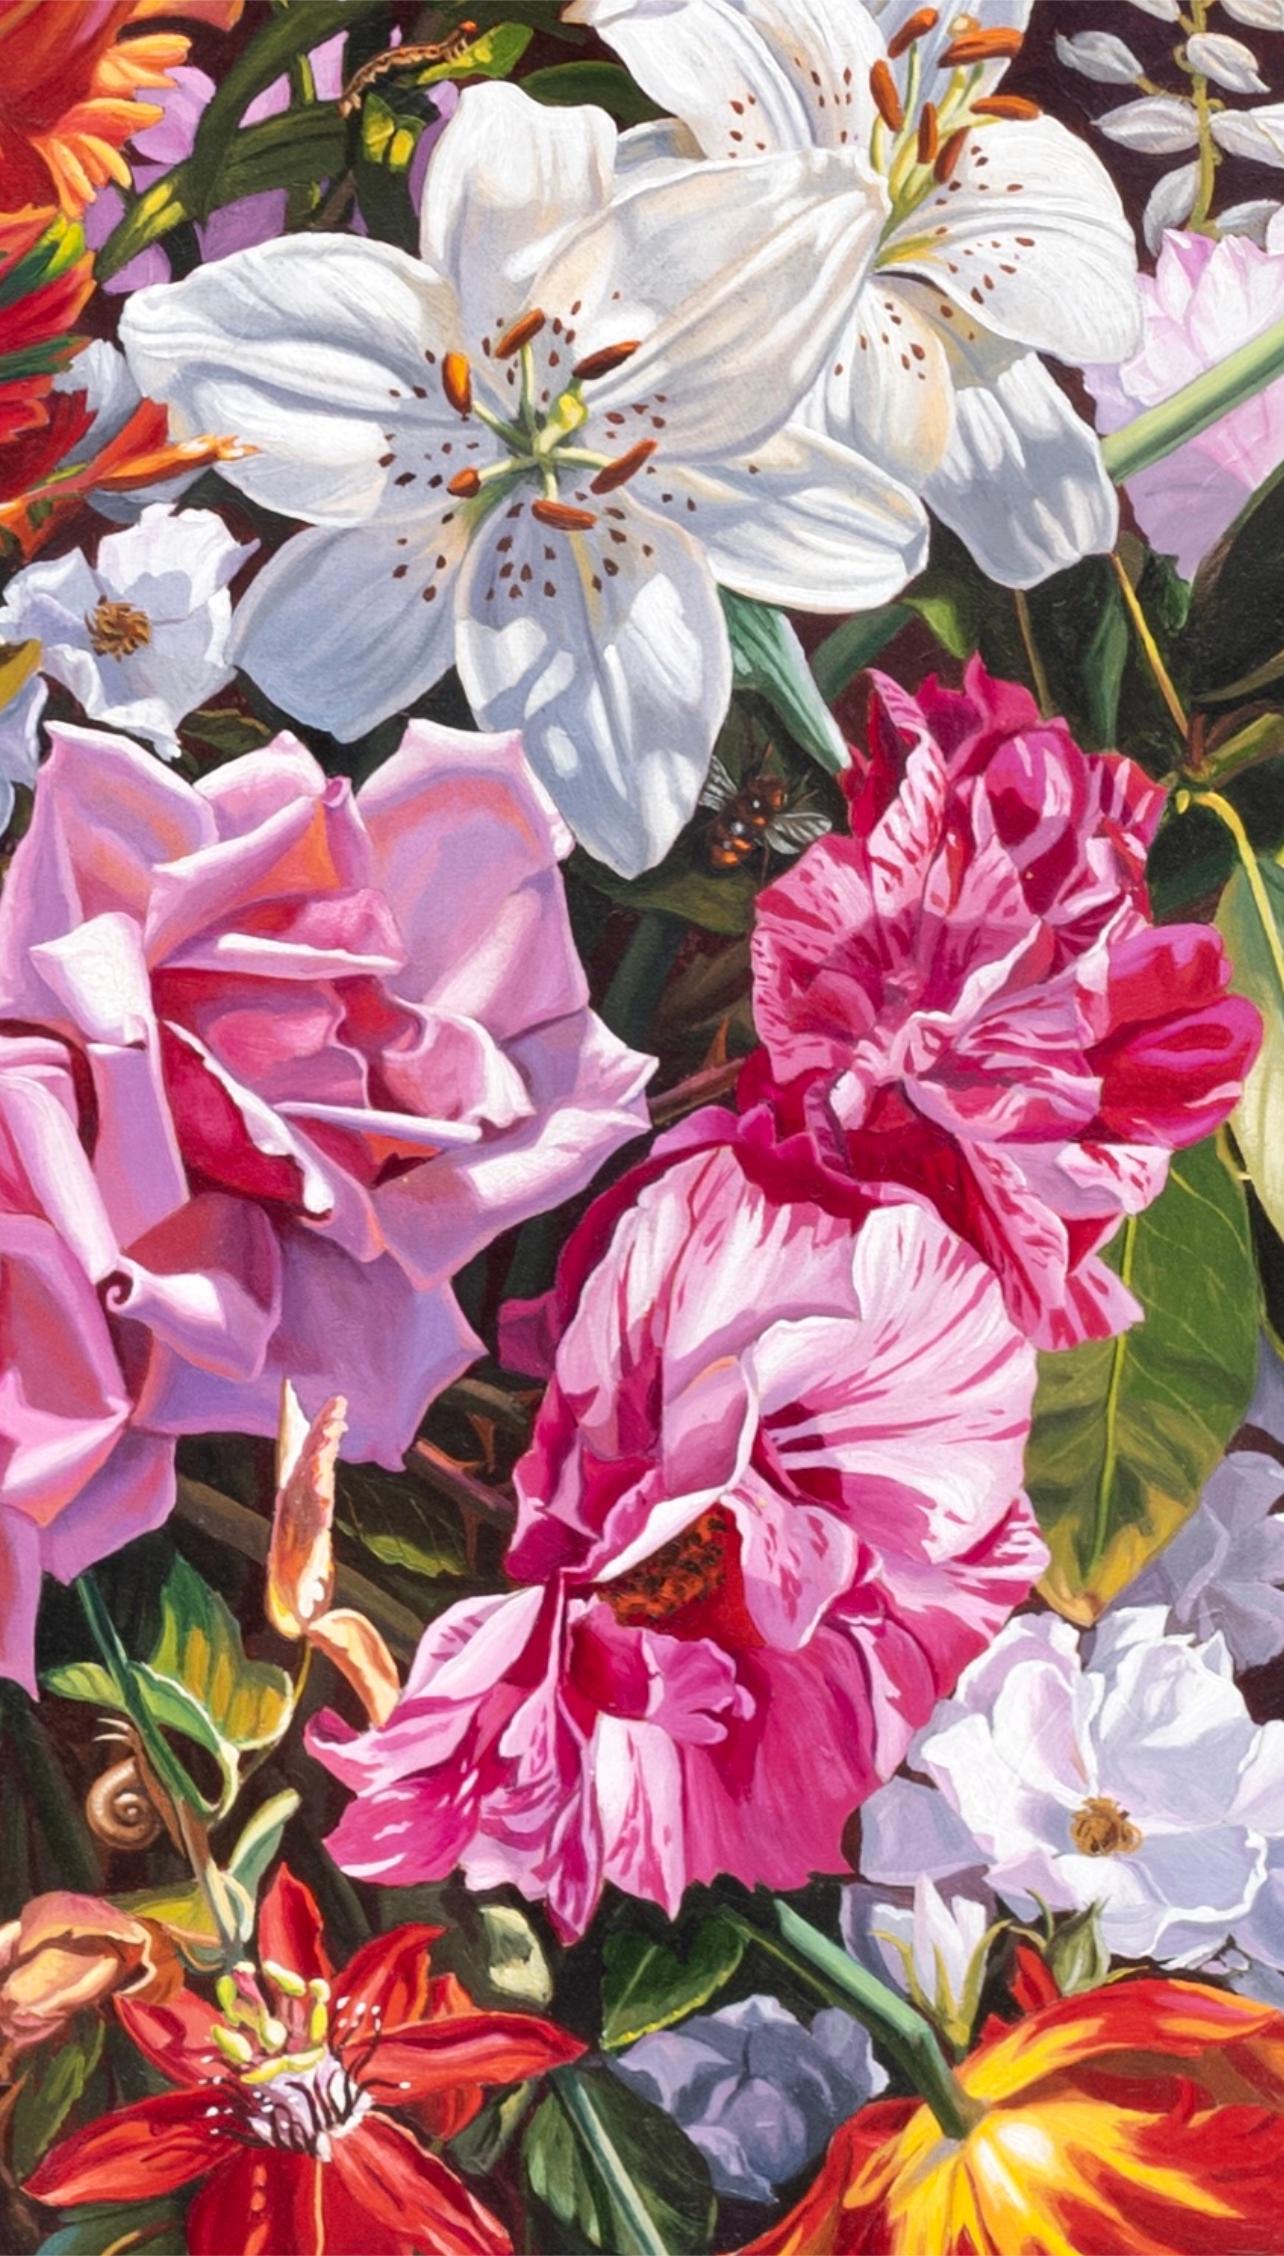 “Flower Piece with Storm, ” Photorealism & Hyperrealism - Painting by Ian Hornak